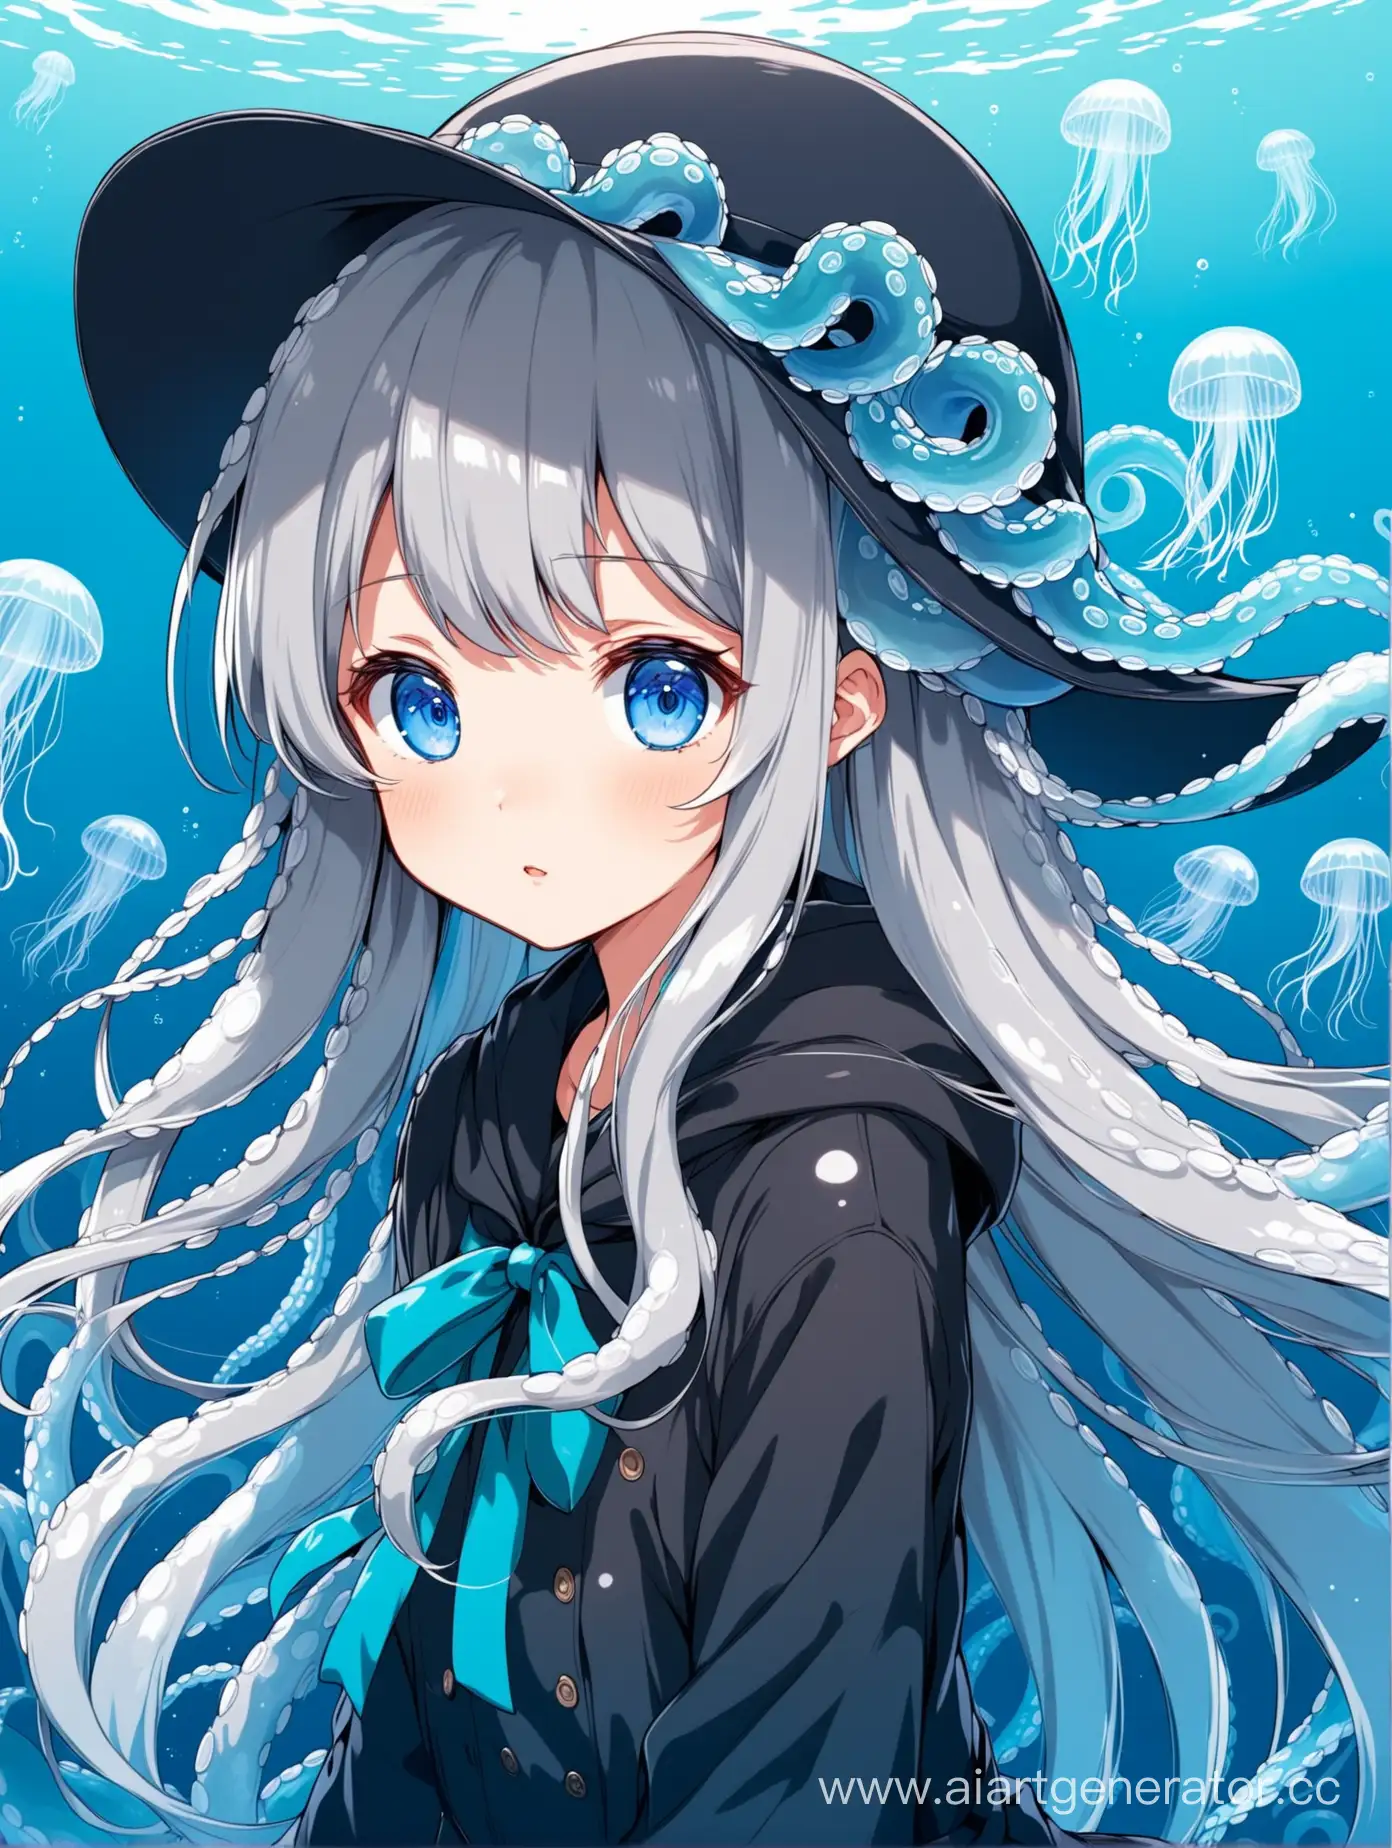 Cute-Anime-Jellyfish-Girl-with-Gray-Hair-and-Blue-Eyes-Wearing-Tentacle-Hat